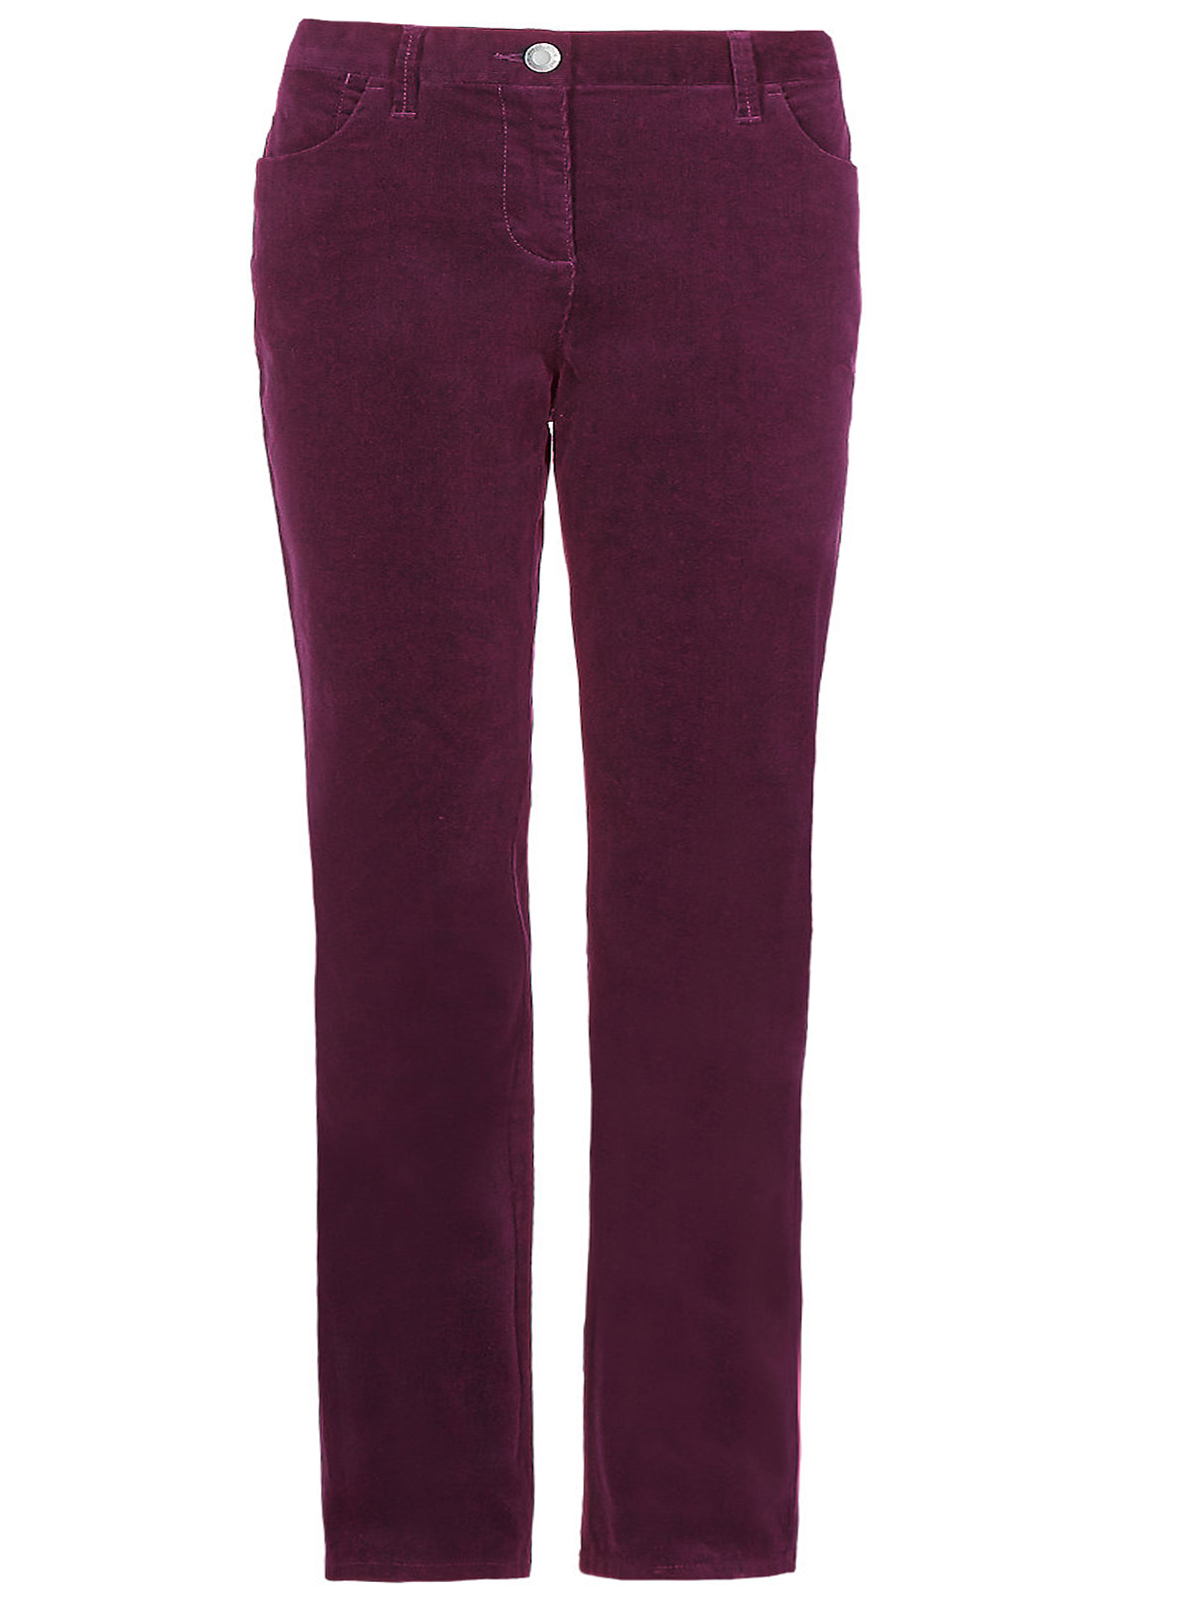 Marks and Spencer - - M&5 BERRY Cotton Rich Cord Straight Leg Trousers ...